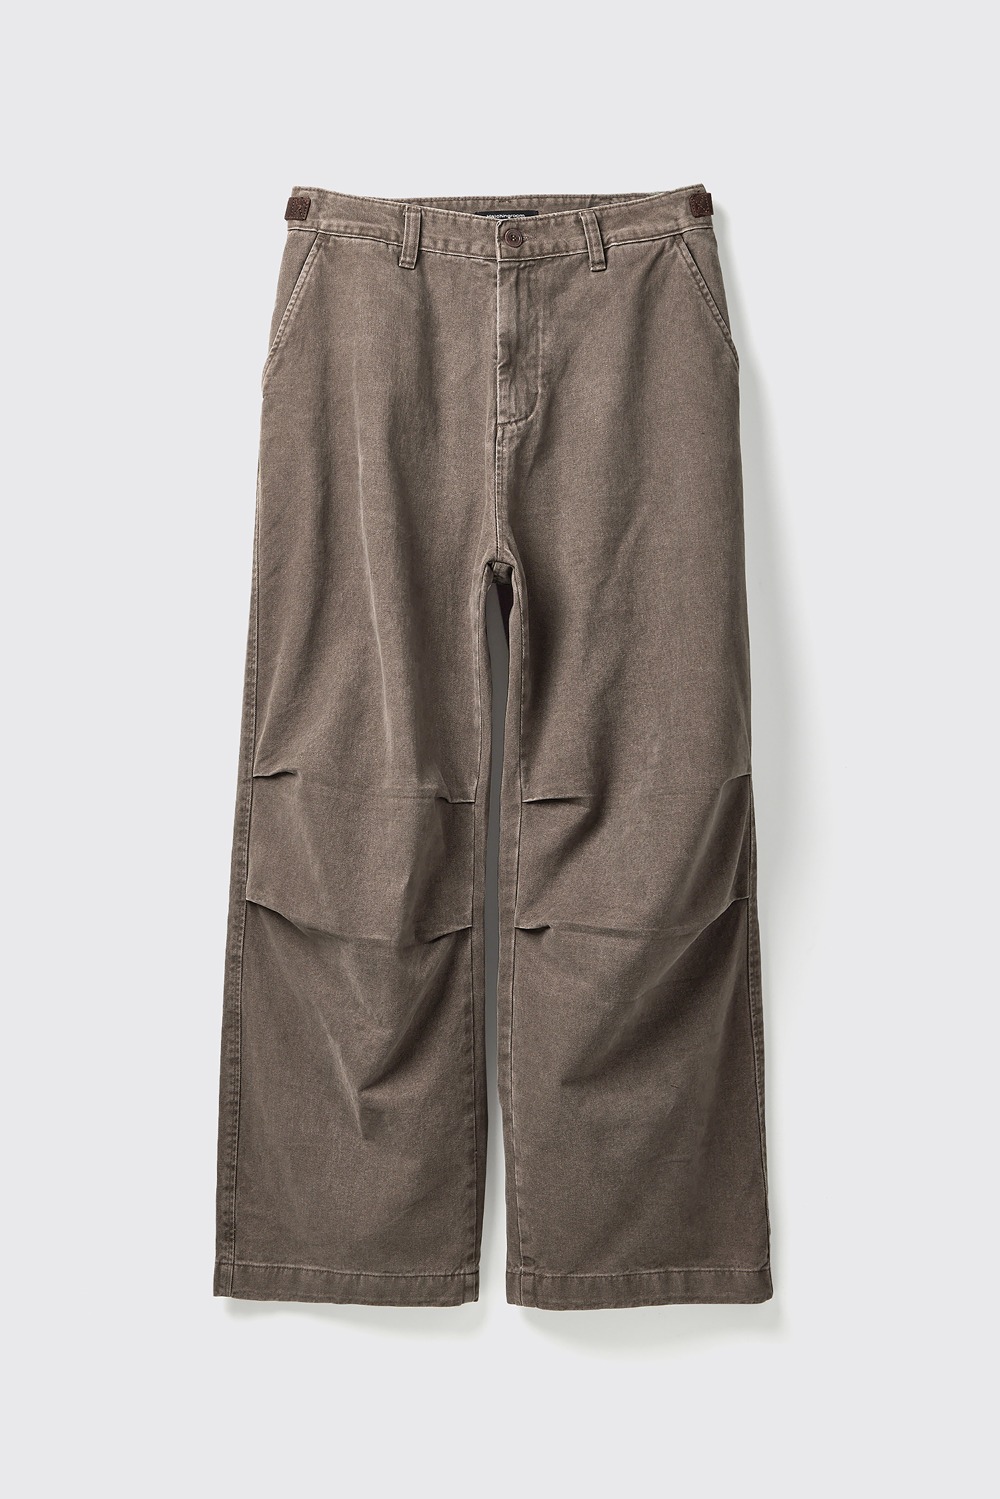 VTG Heavy Snow Pants Washed Brown